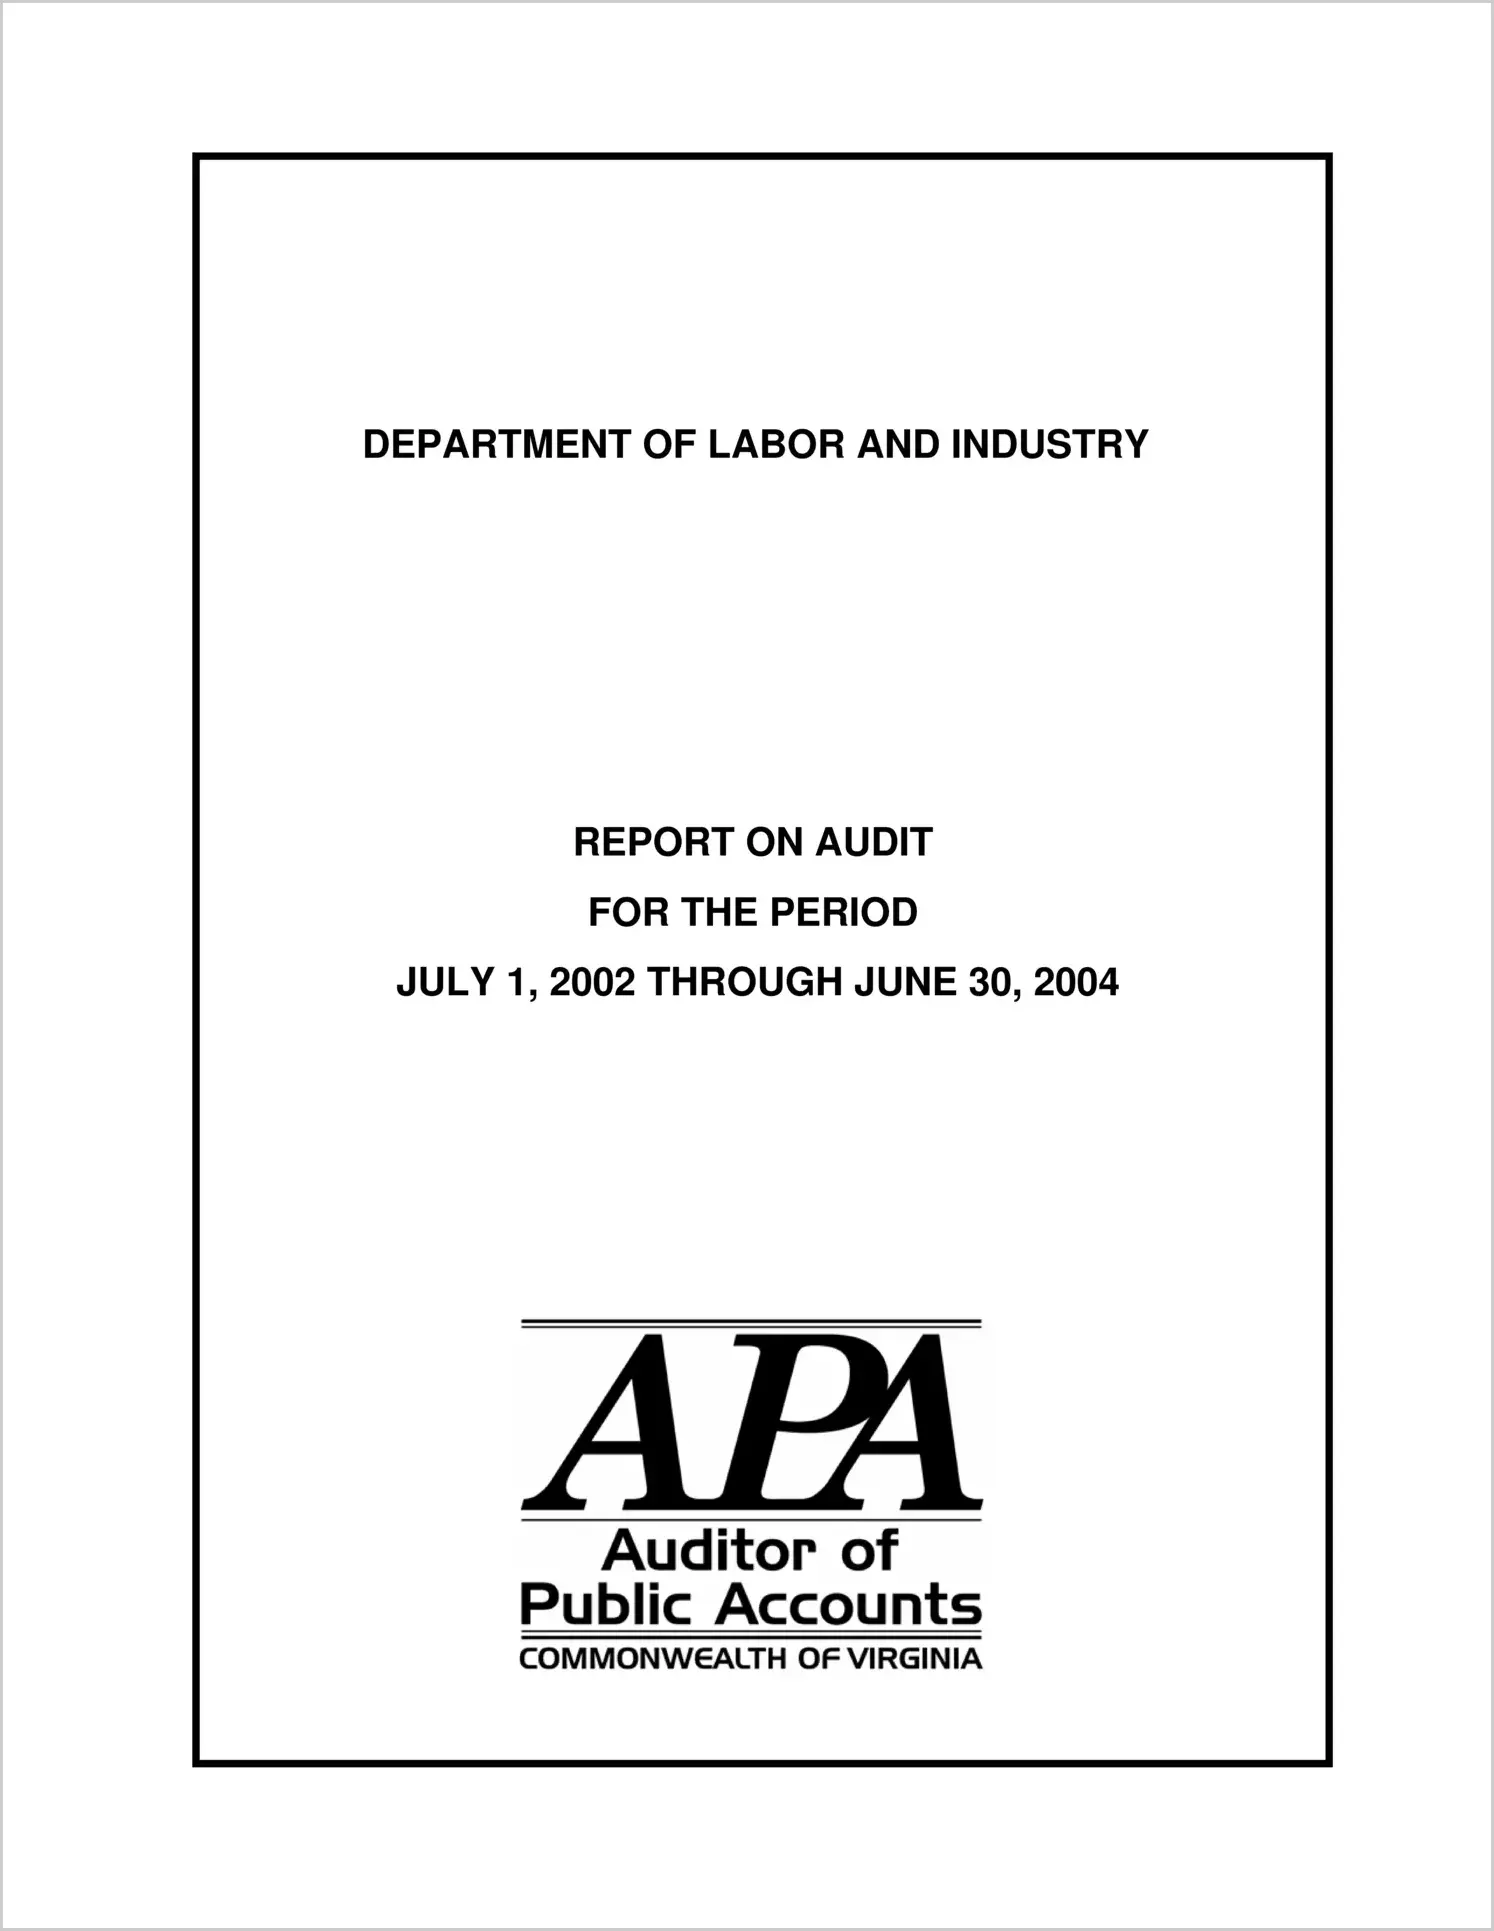 Department of Labor and Industry for the period July 1, 2002 through June 30, 2004